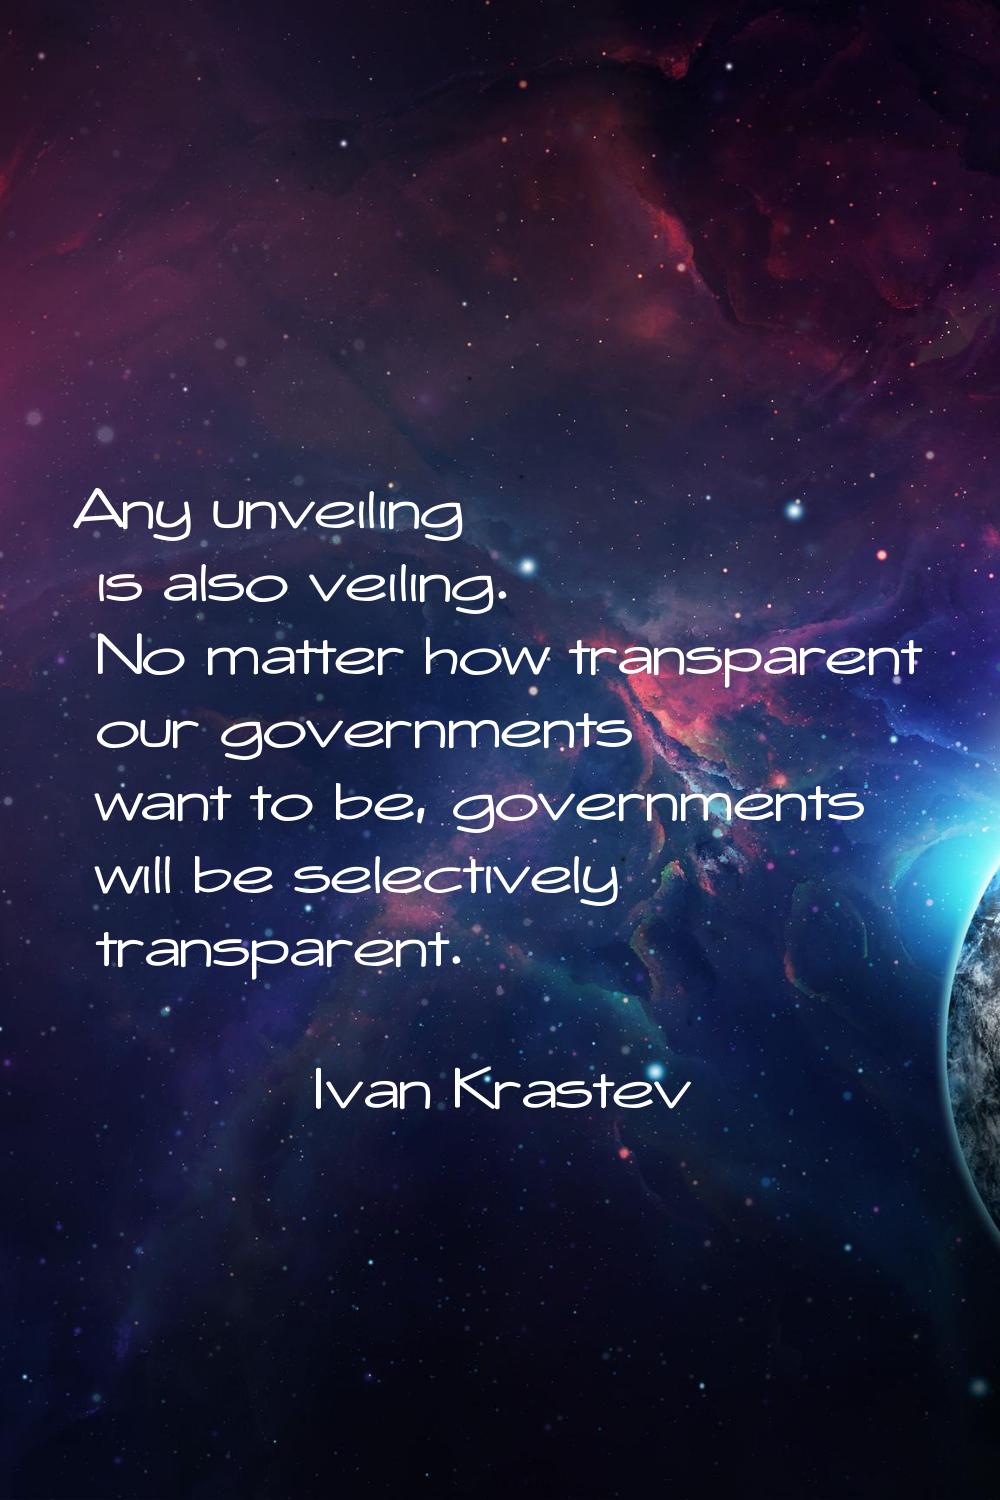 Any unveiling is also veiling. No matter how transparent our governments want to be, governments wi